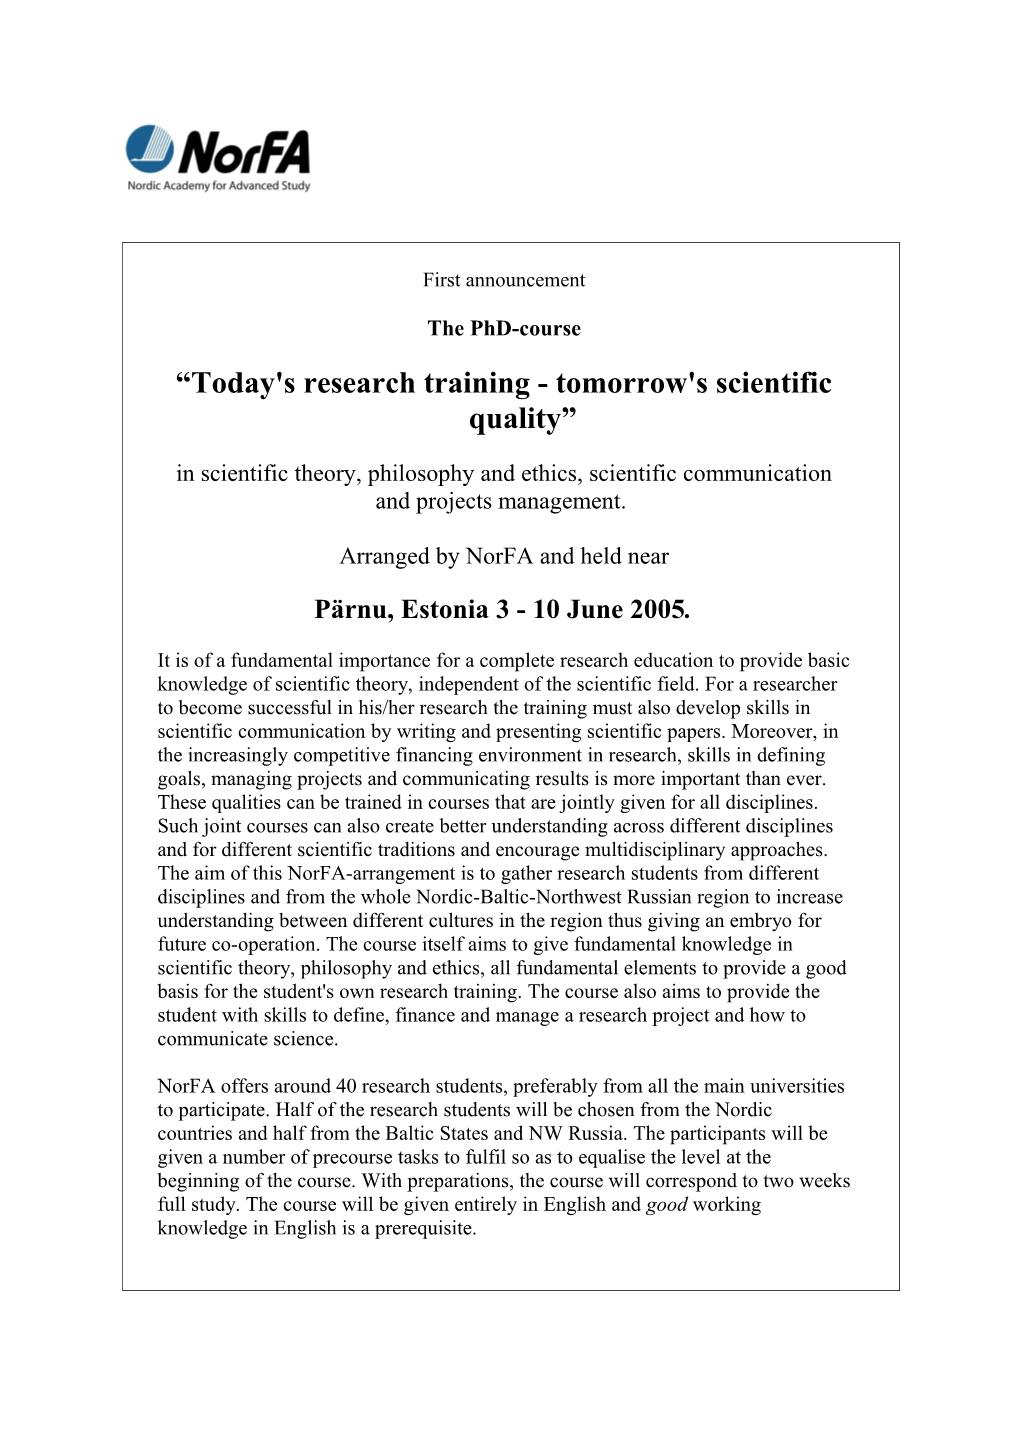 Today's Research Training - Tomorrow's Scientific Quality